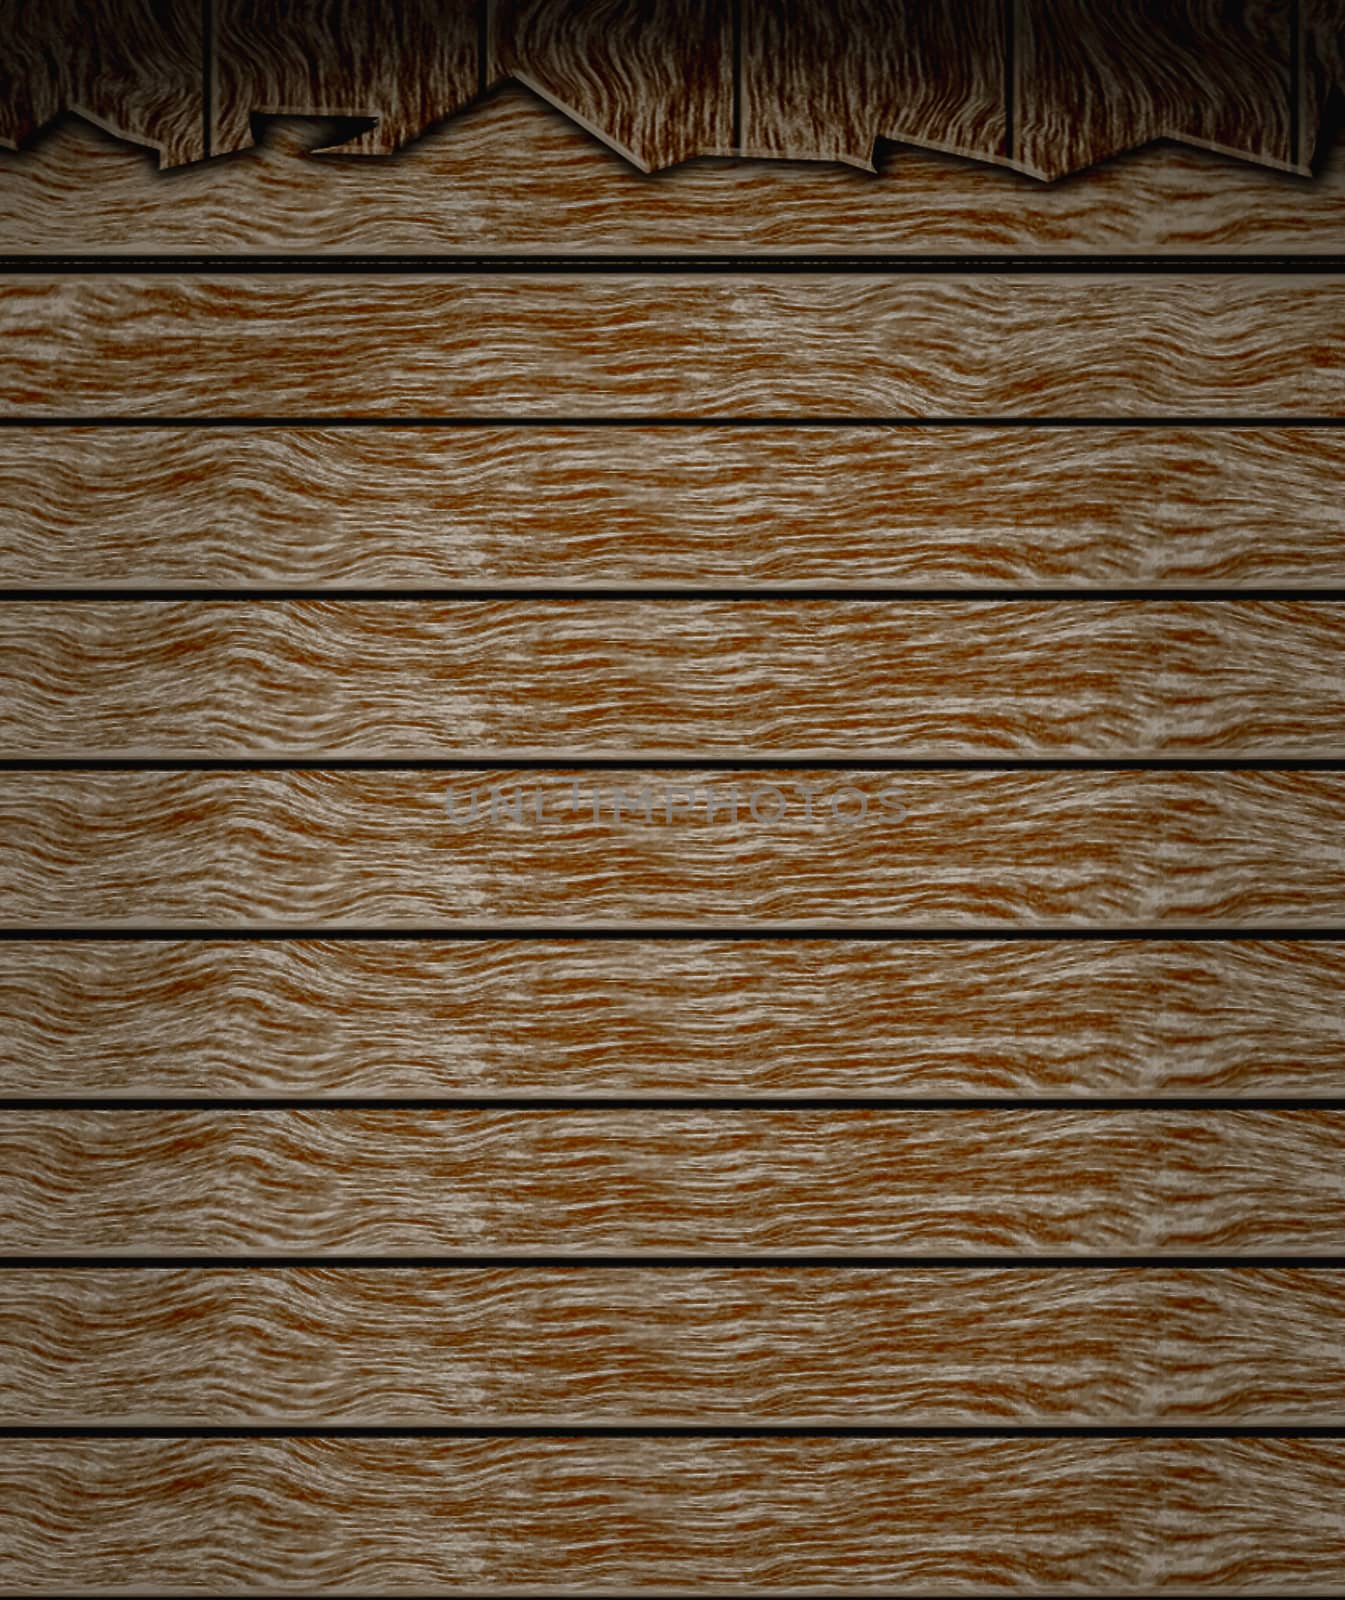 Cracked wood plank background.For art texture or web design and web background.